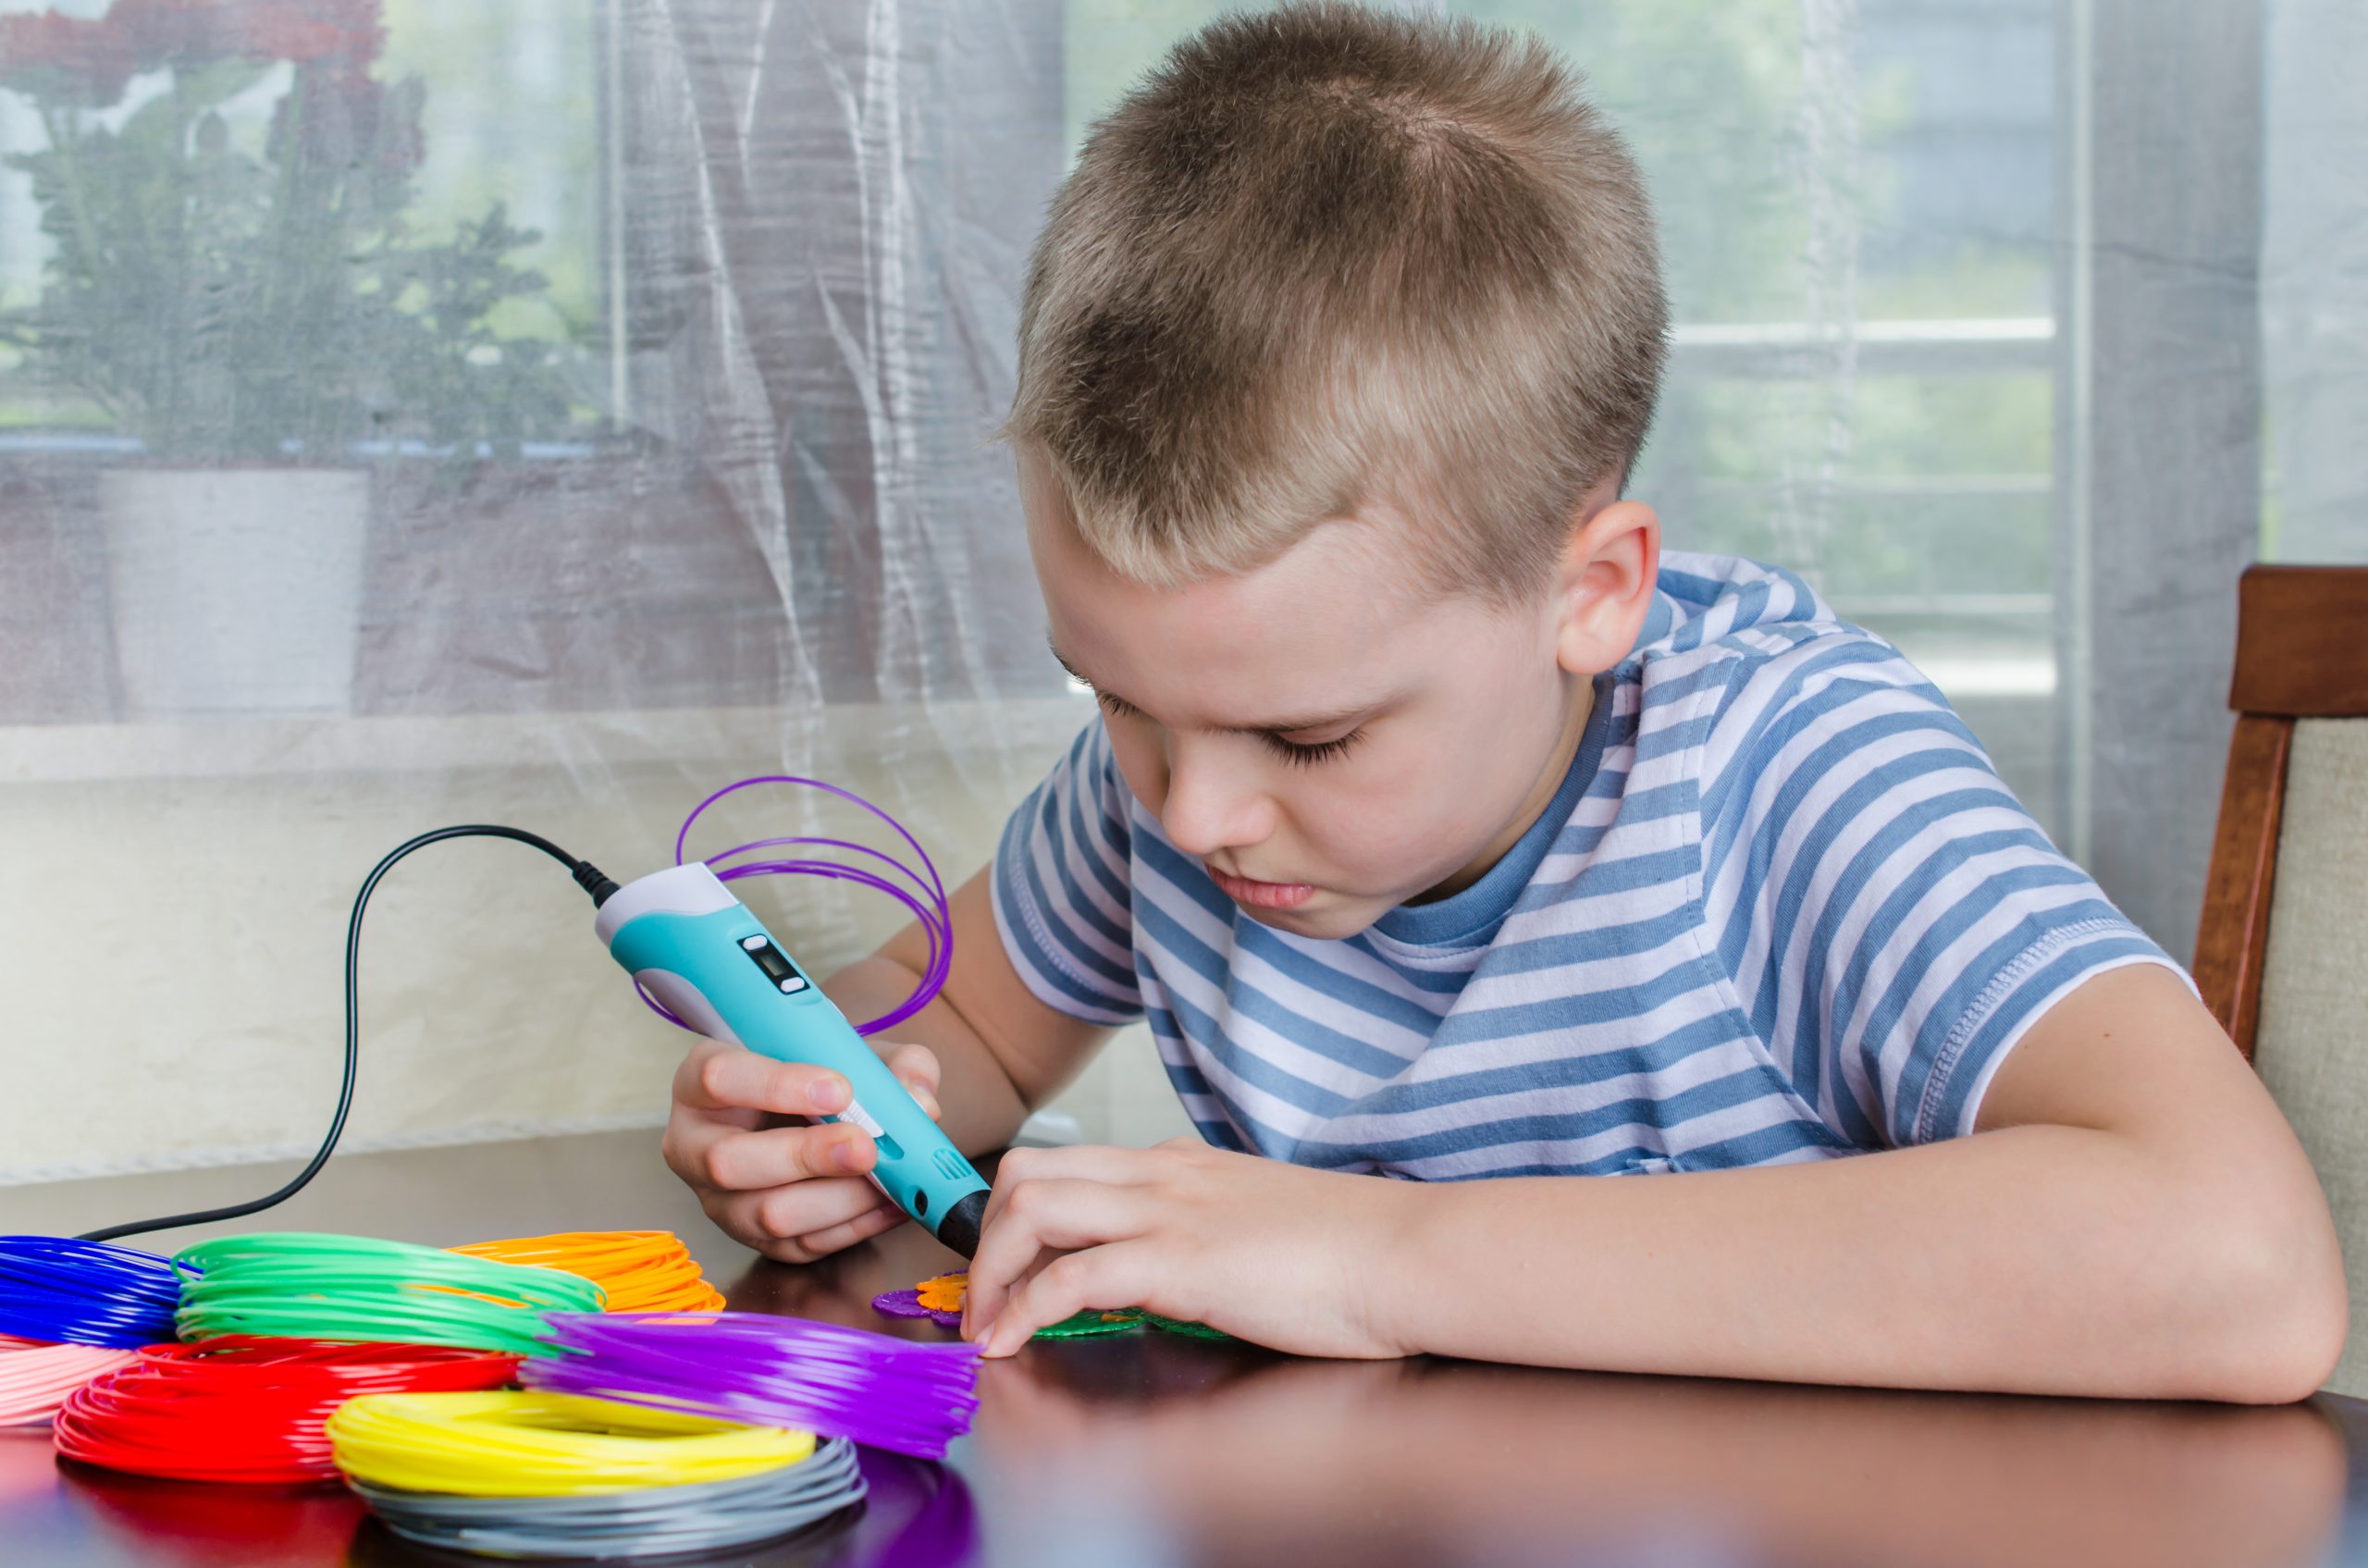 Boy using 3D pen. Happy child making flower from colored ABS plastic. Creative hobby at home, technology, leisure, education concept.